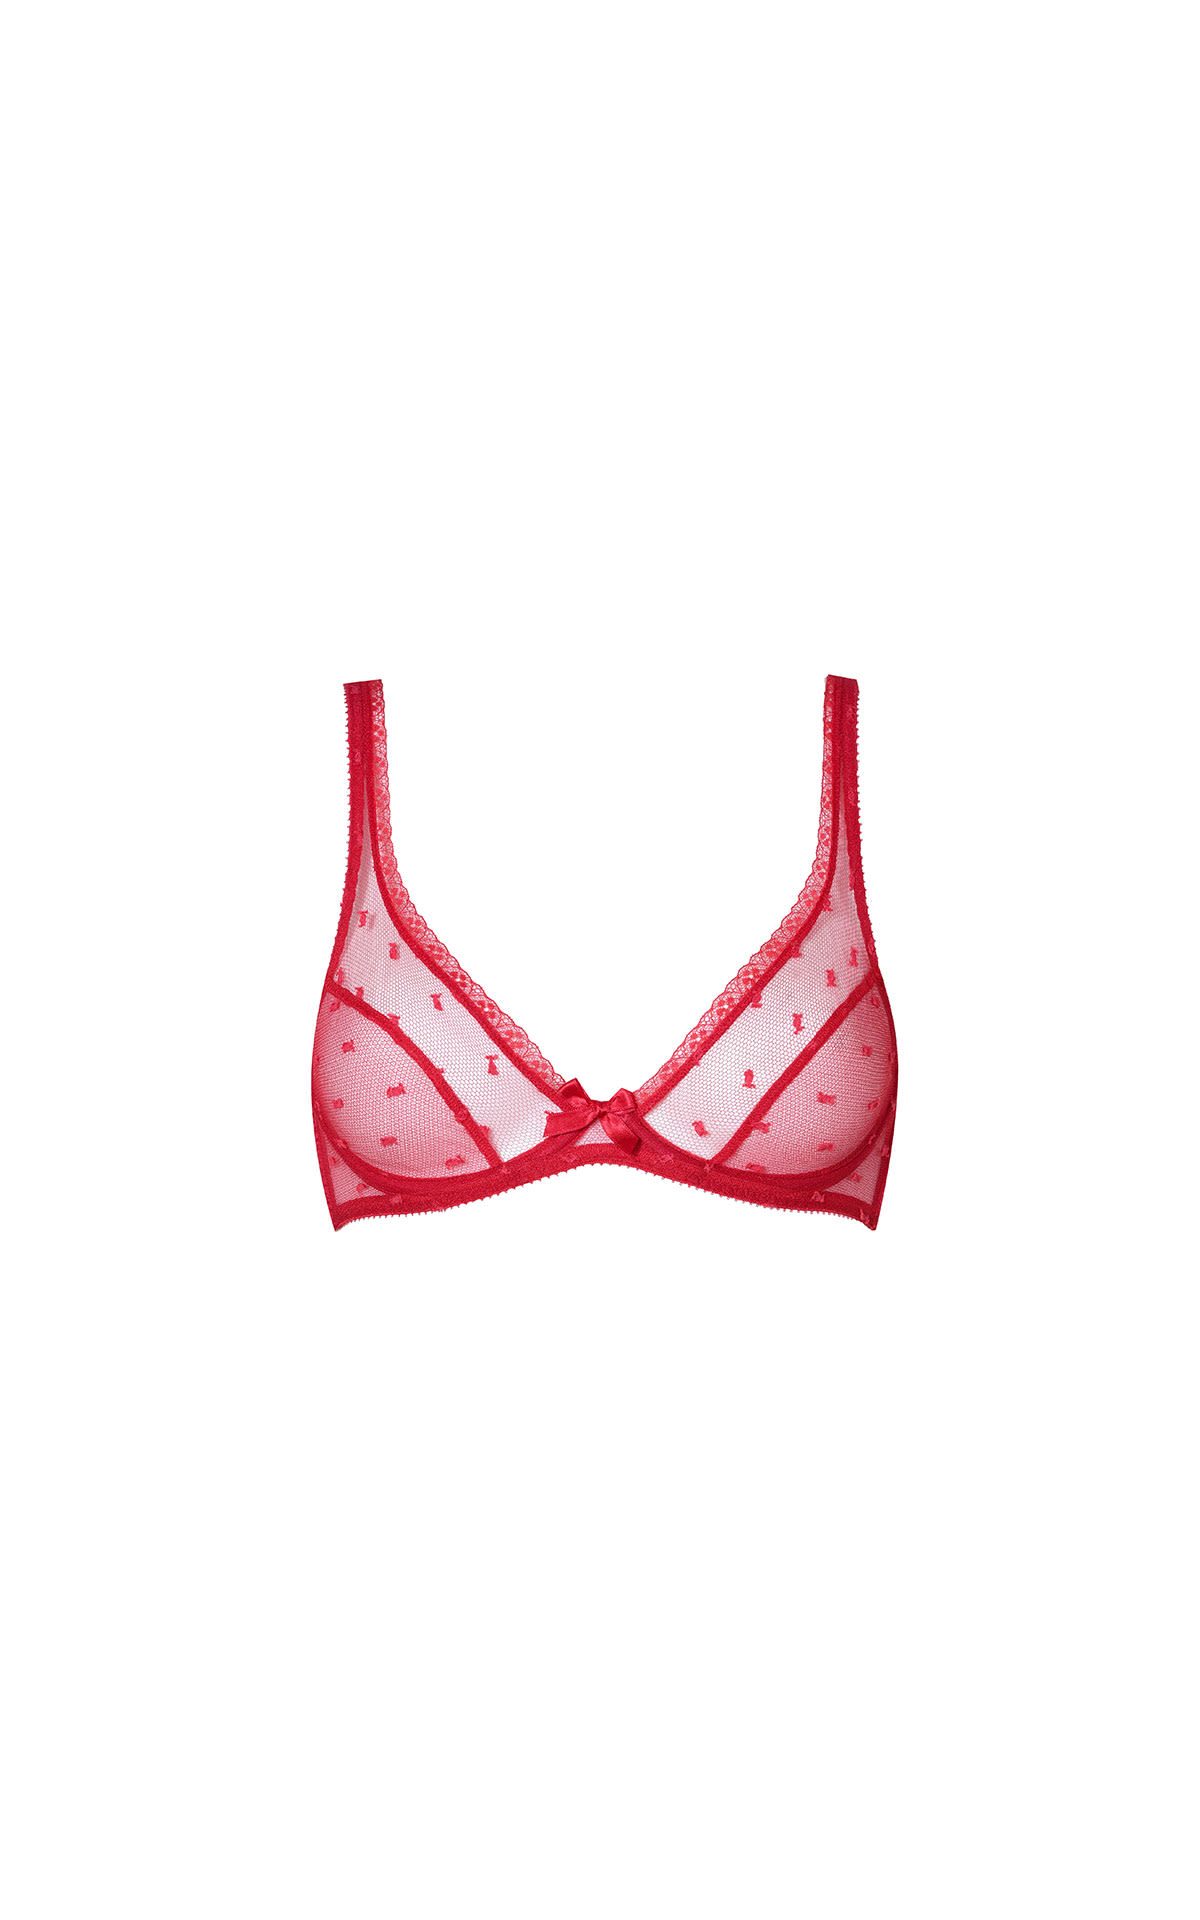 Agent Provocateur Madelina bra red from Bicester Village